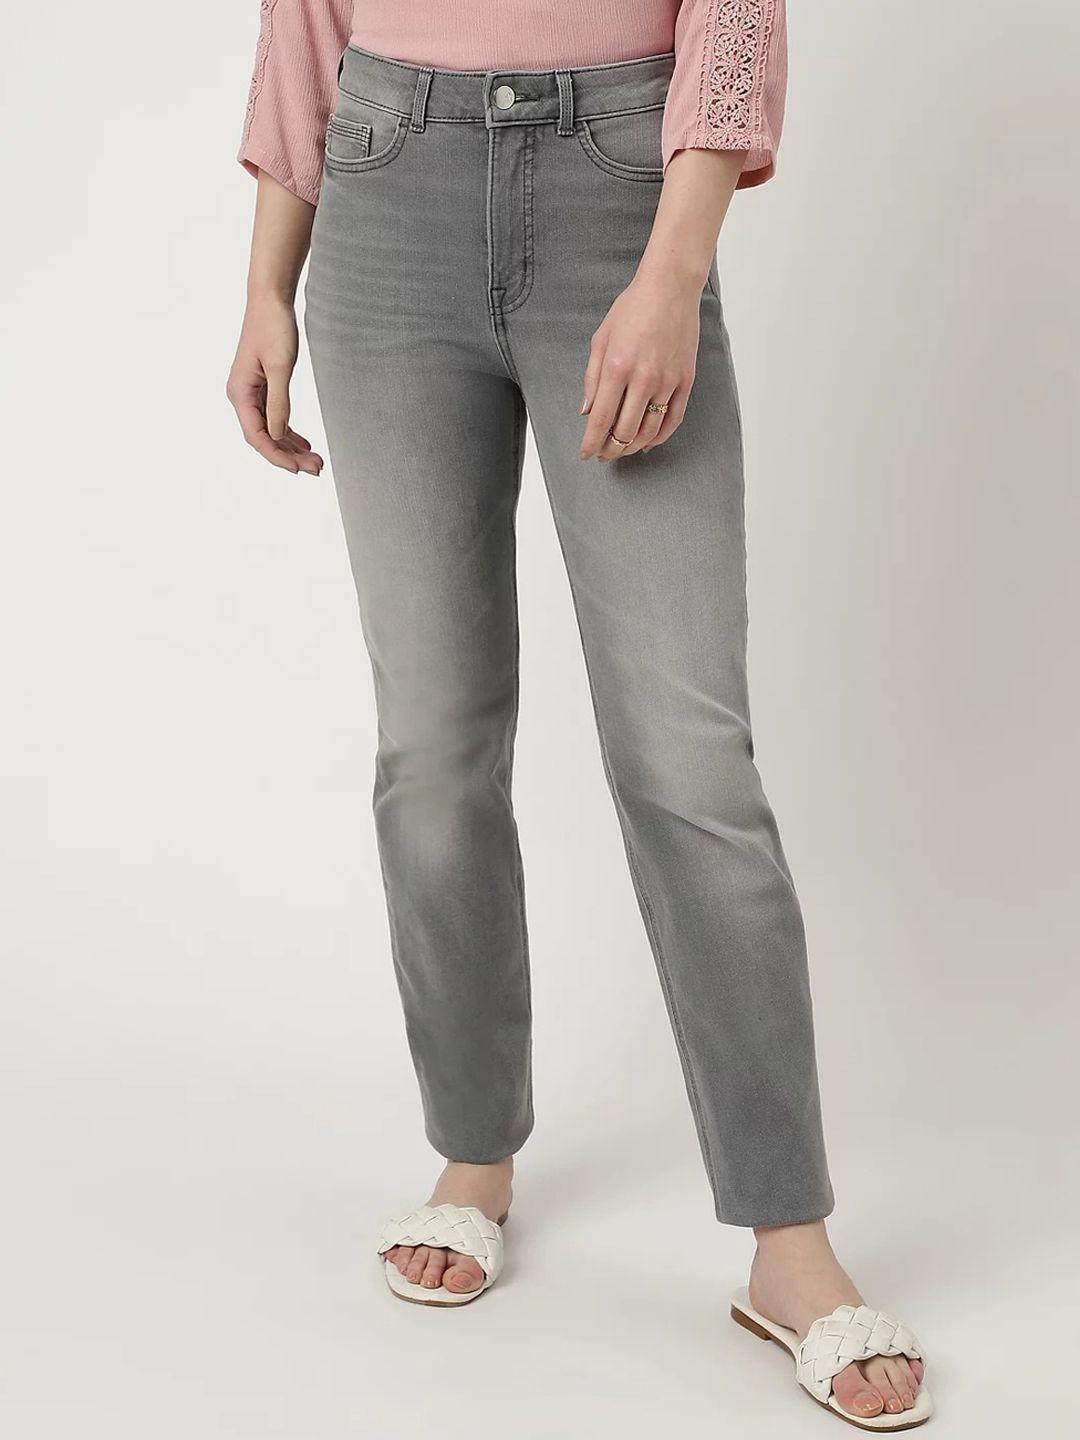 marks-&-spencer-women-high-rise-clean-look-heavy-fade-jeans